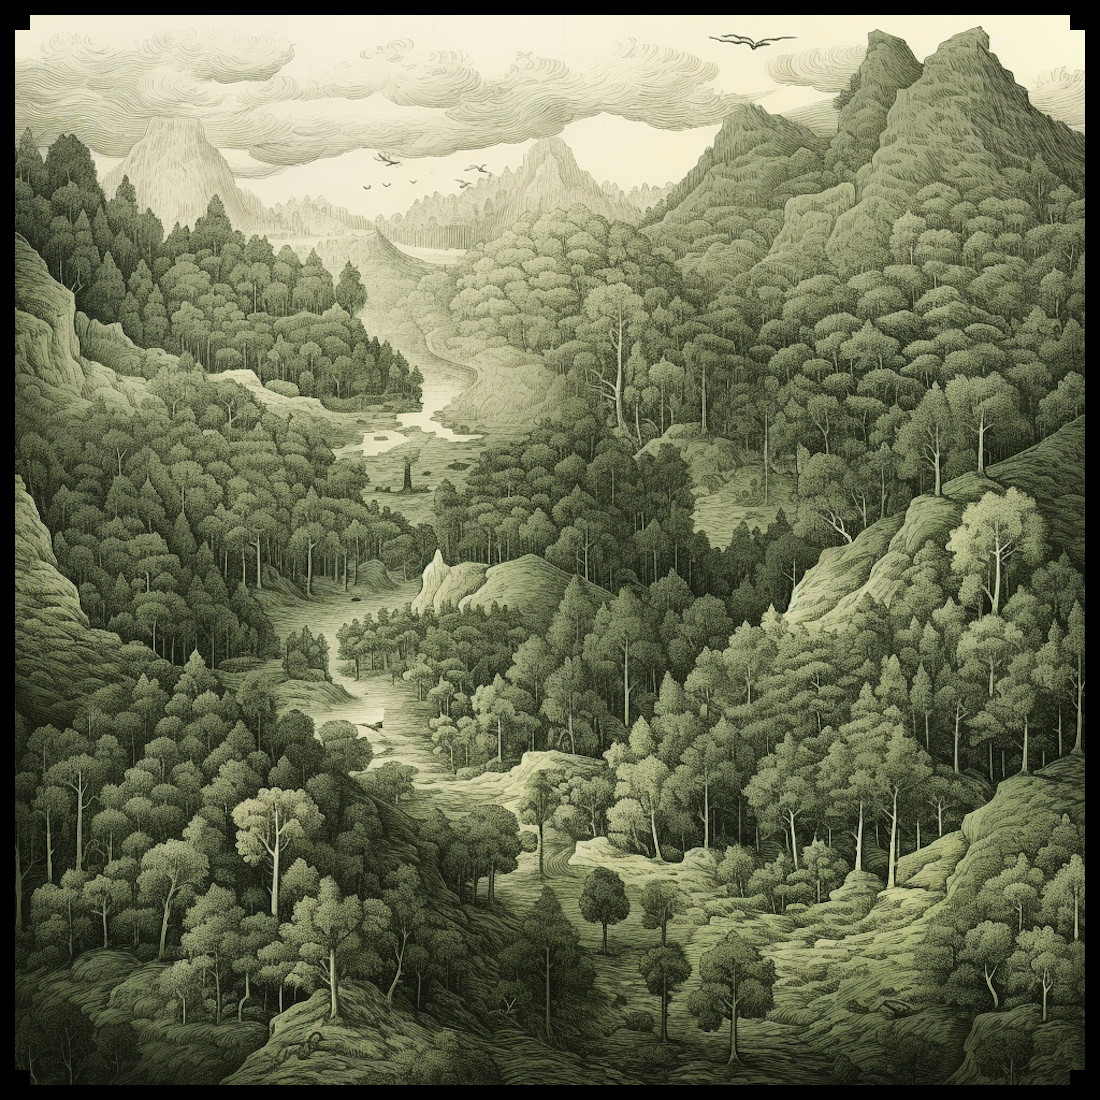 Wondrdraft assets and symbols, fantasy map assets, tree clumps, trees, forests and woods, old cartography, etching